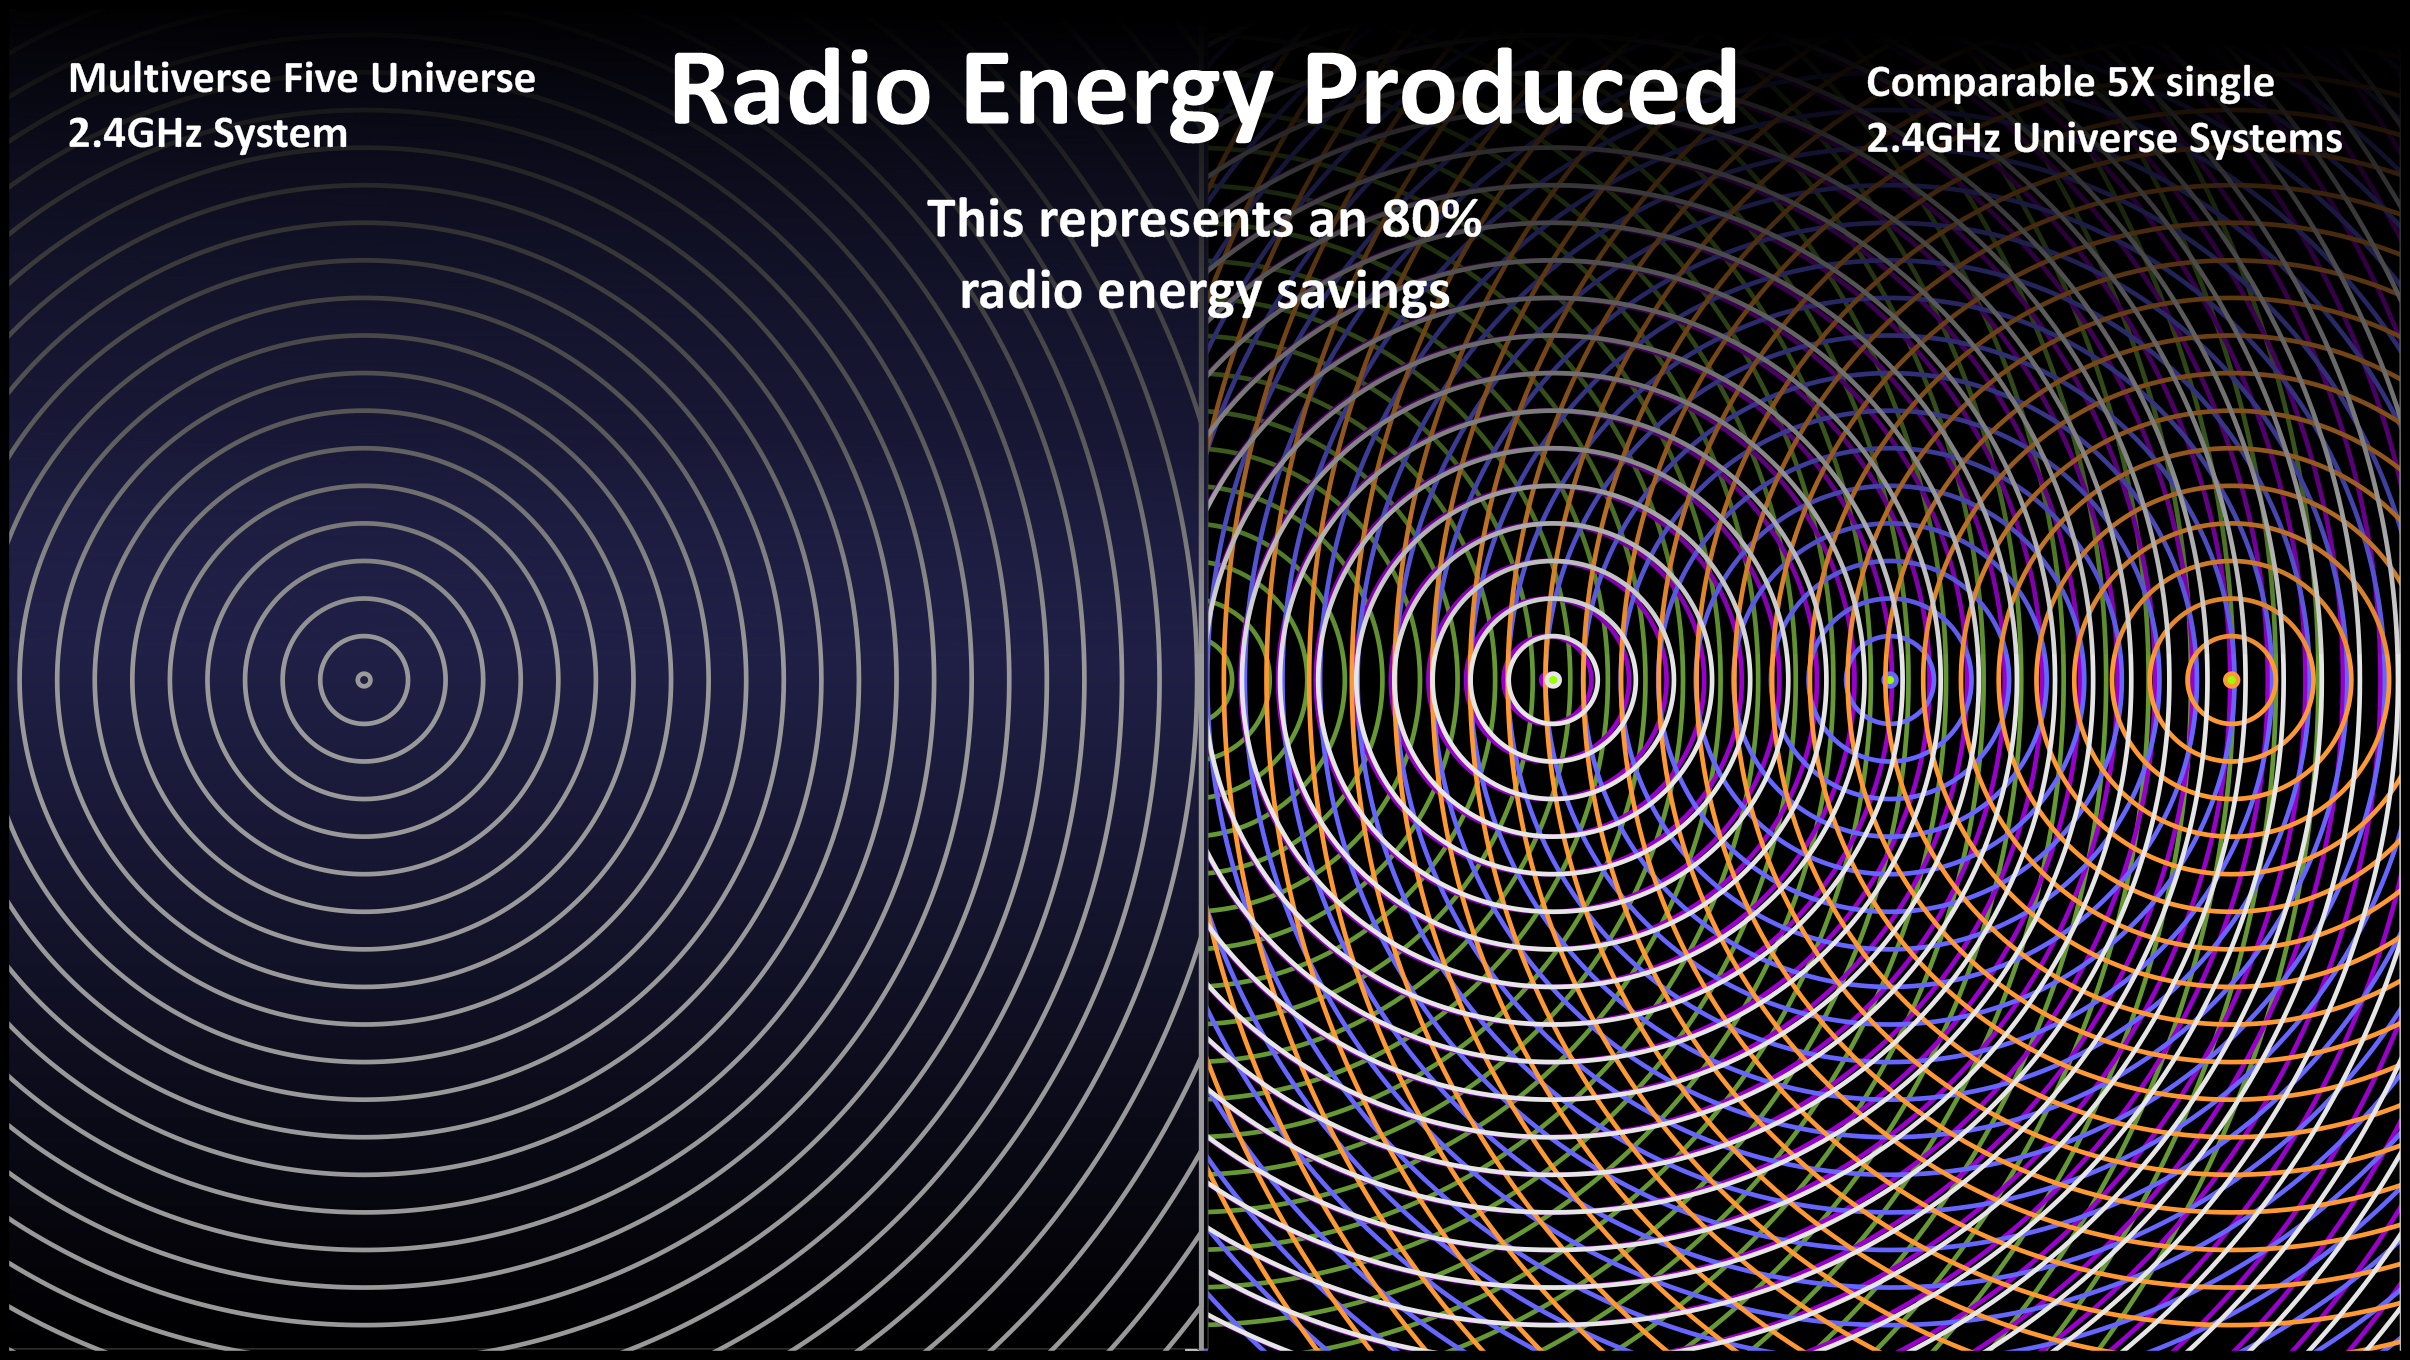 Multiverse 5 Radio Energy made by Multiverse vs other